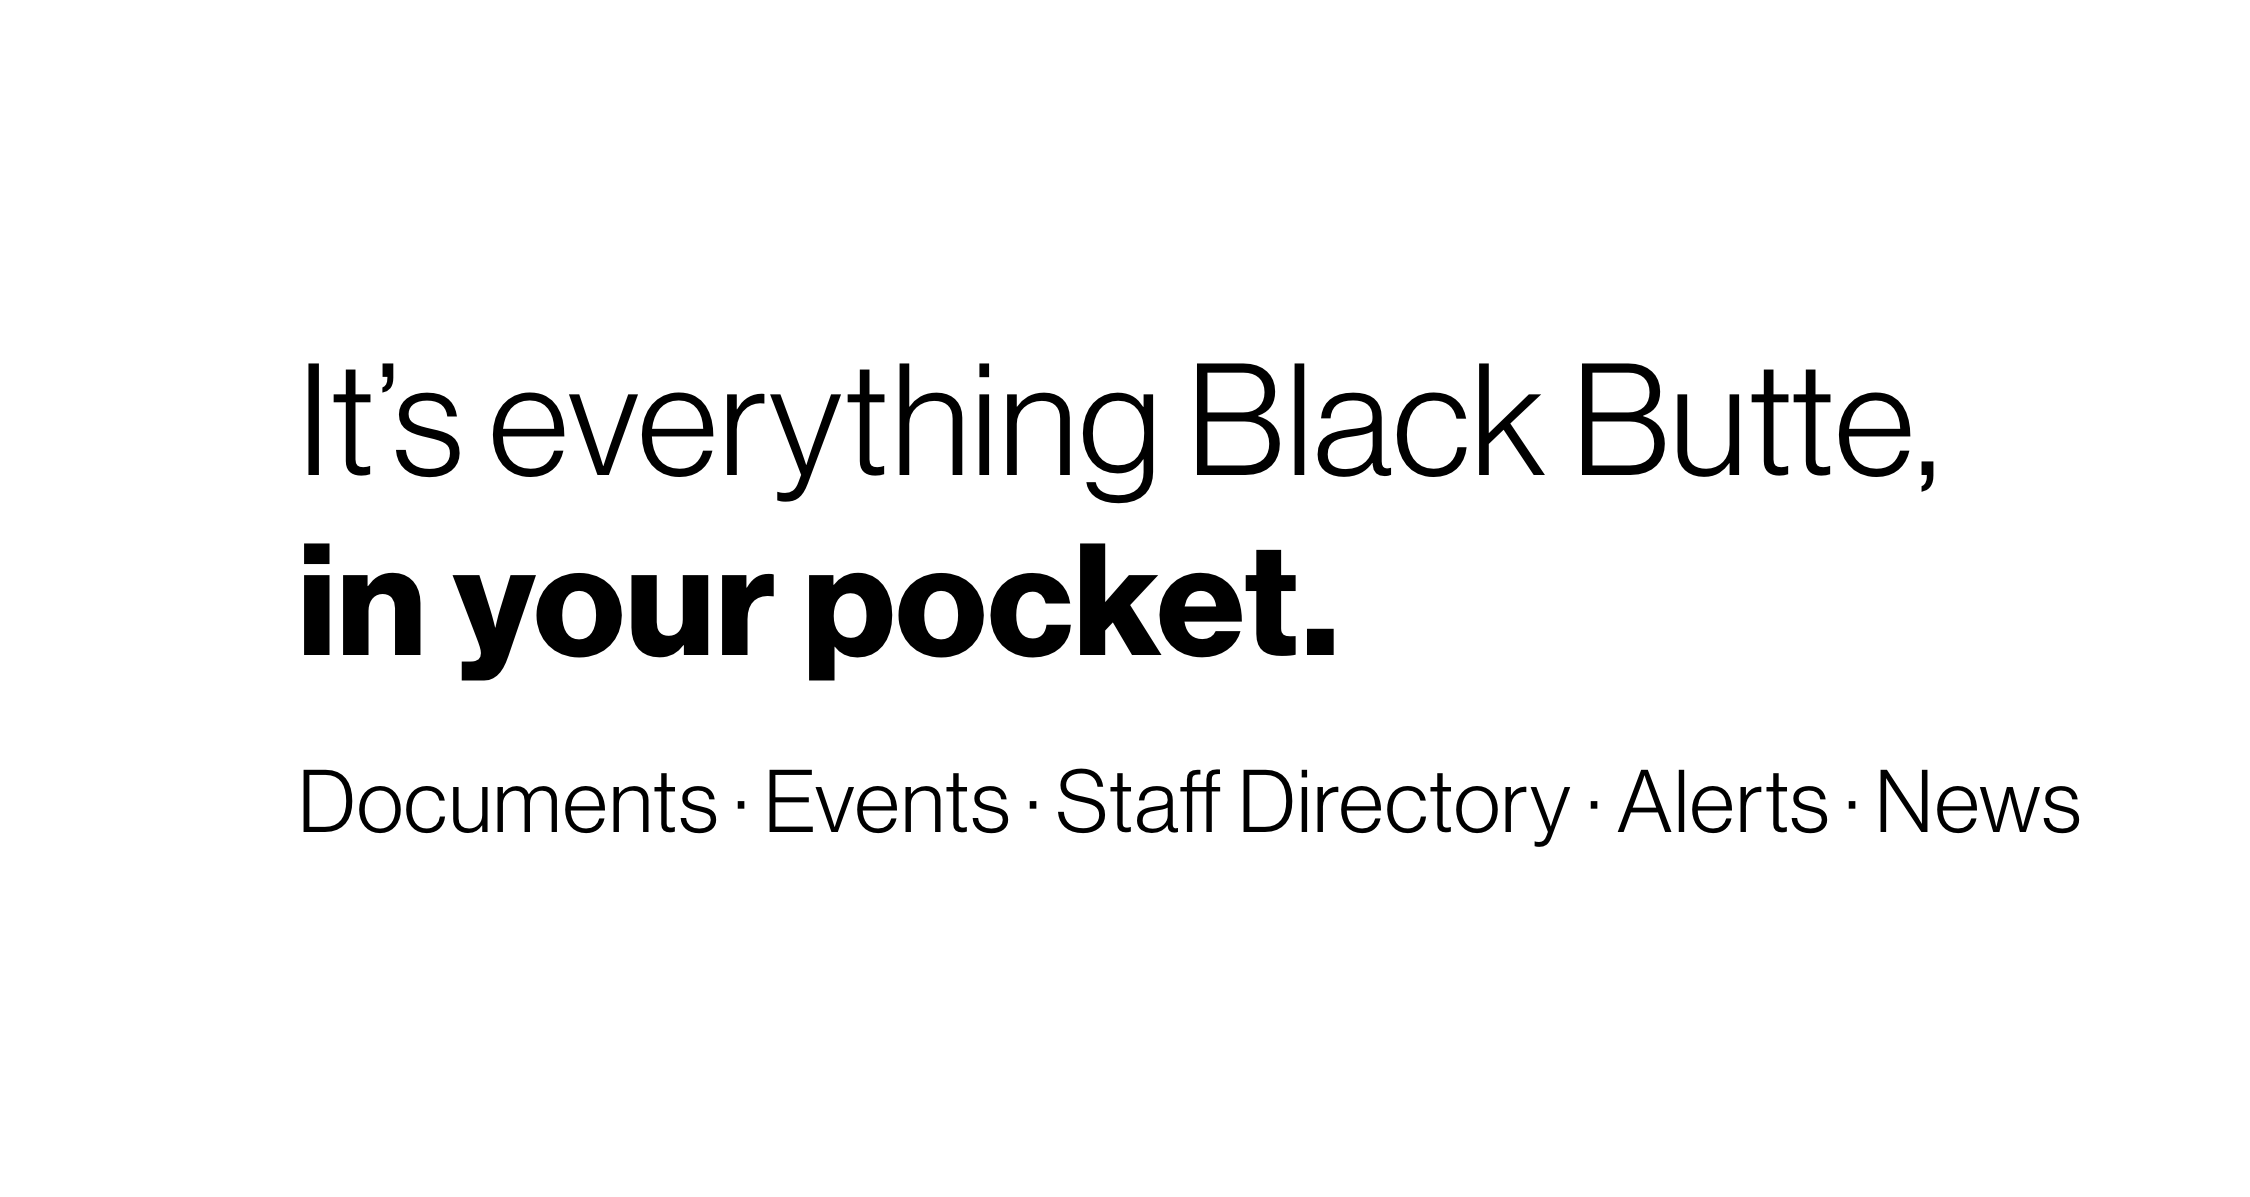 It's everything Black Butte in your pocket!